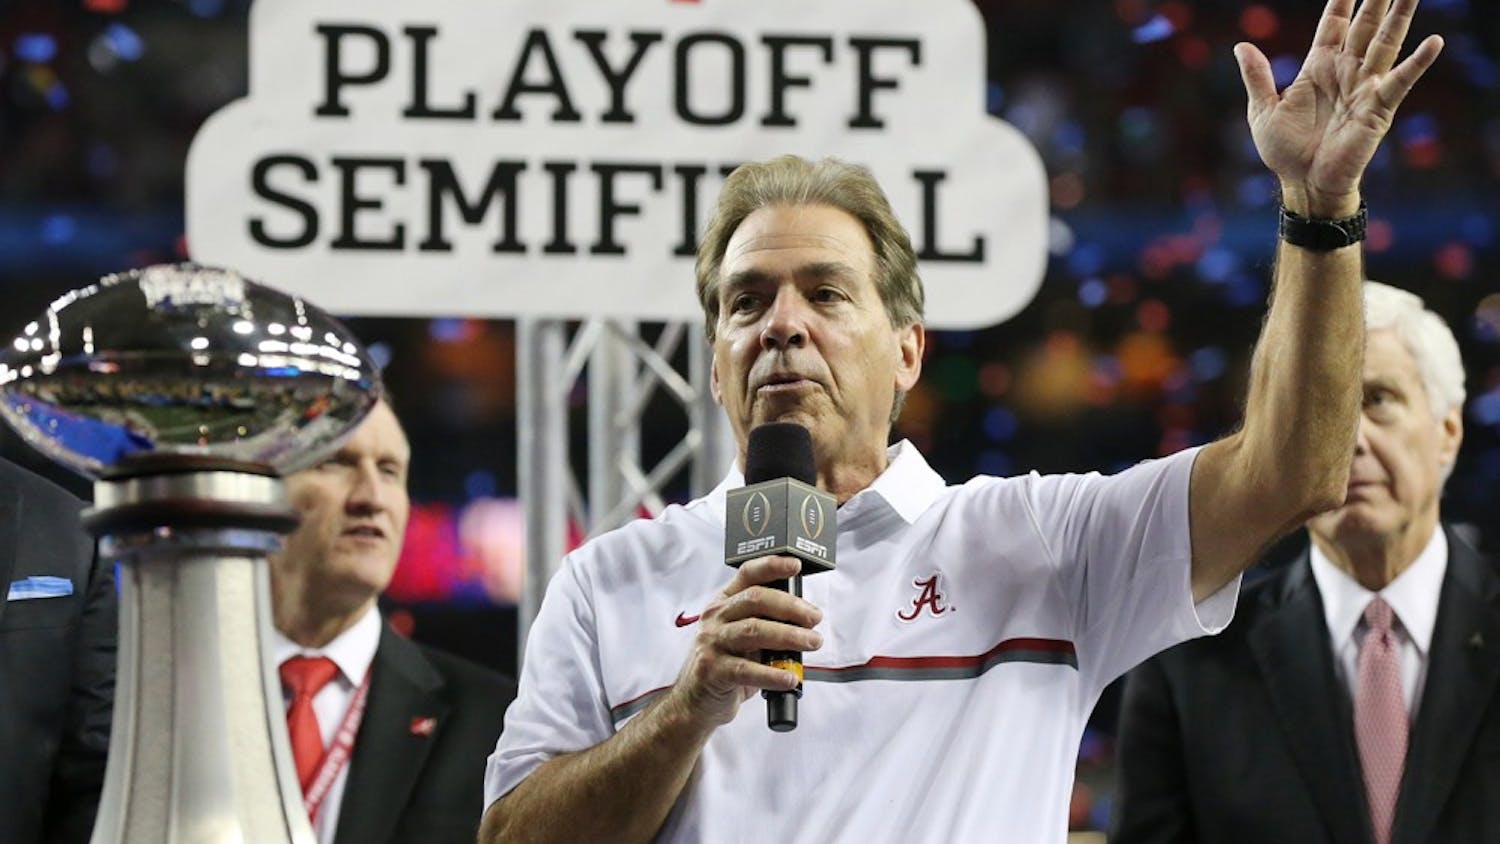 Alabama head coach Nick Saban is presented the trophy after a 24-7 victory against Washington in the Peach Bowl at the Georgia Dome in Atlanta on Saturday, Dec. 31, 2016. (Curtis Compton/Atlanta Journal-Constitution/TNS)